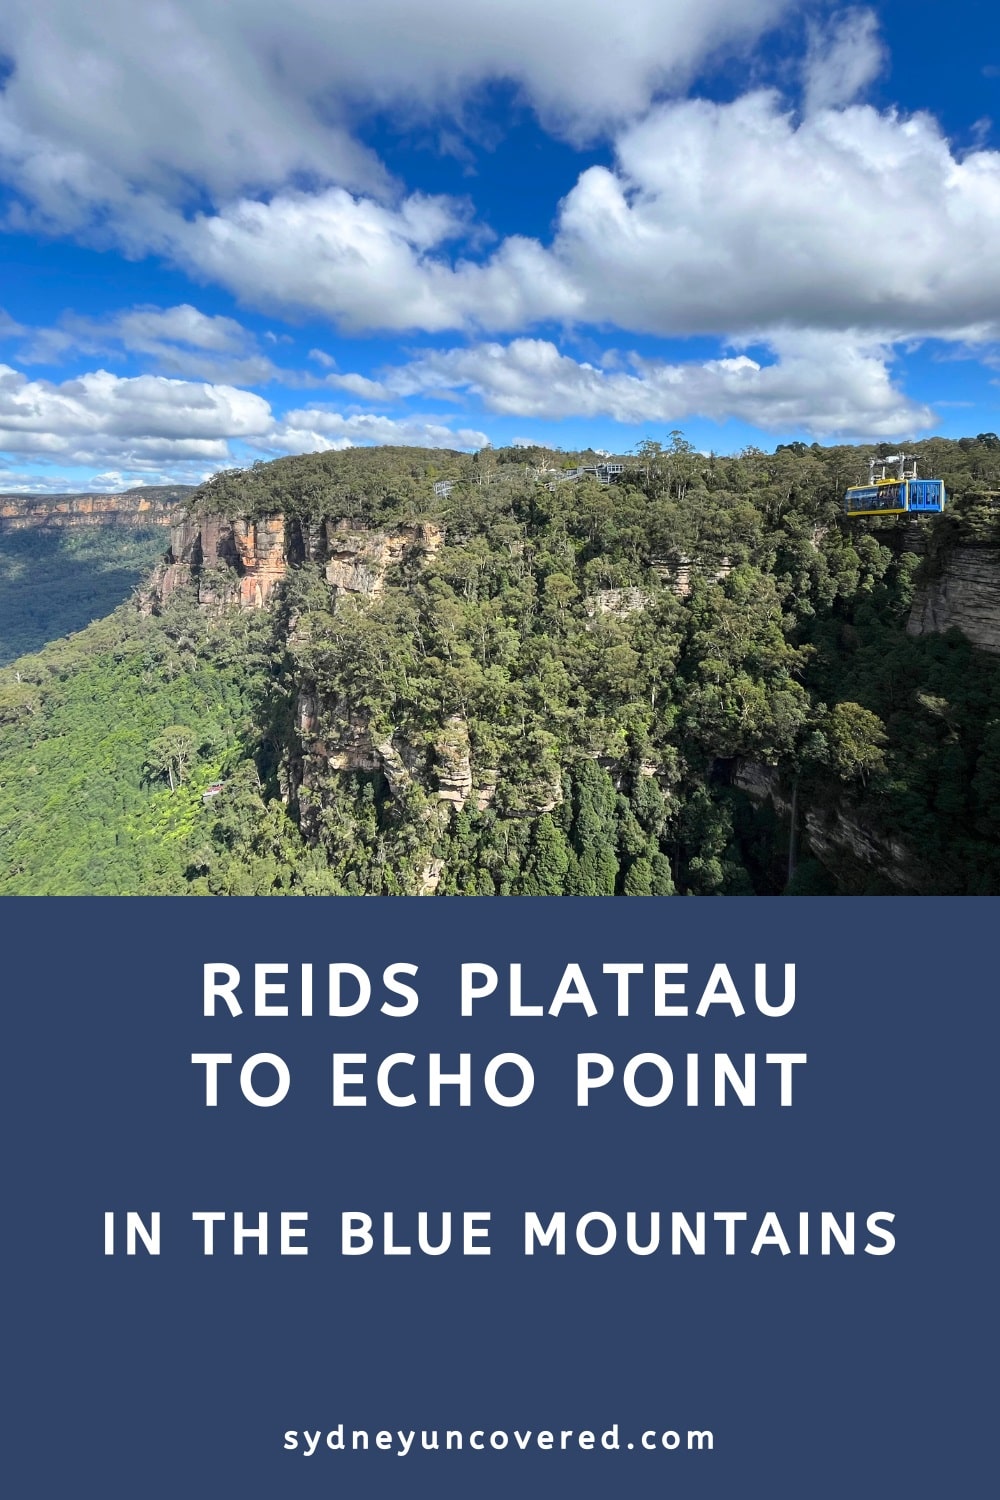 Reids Plateau to Echo Point in the Blue Mountains